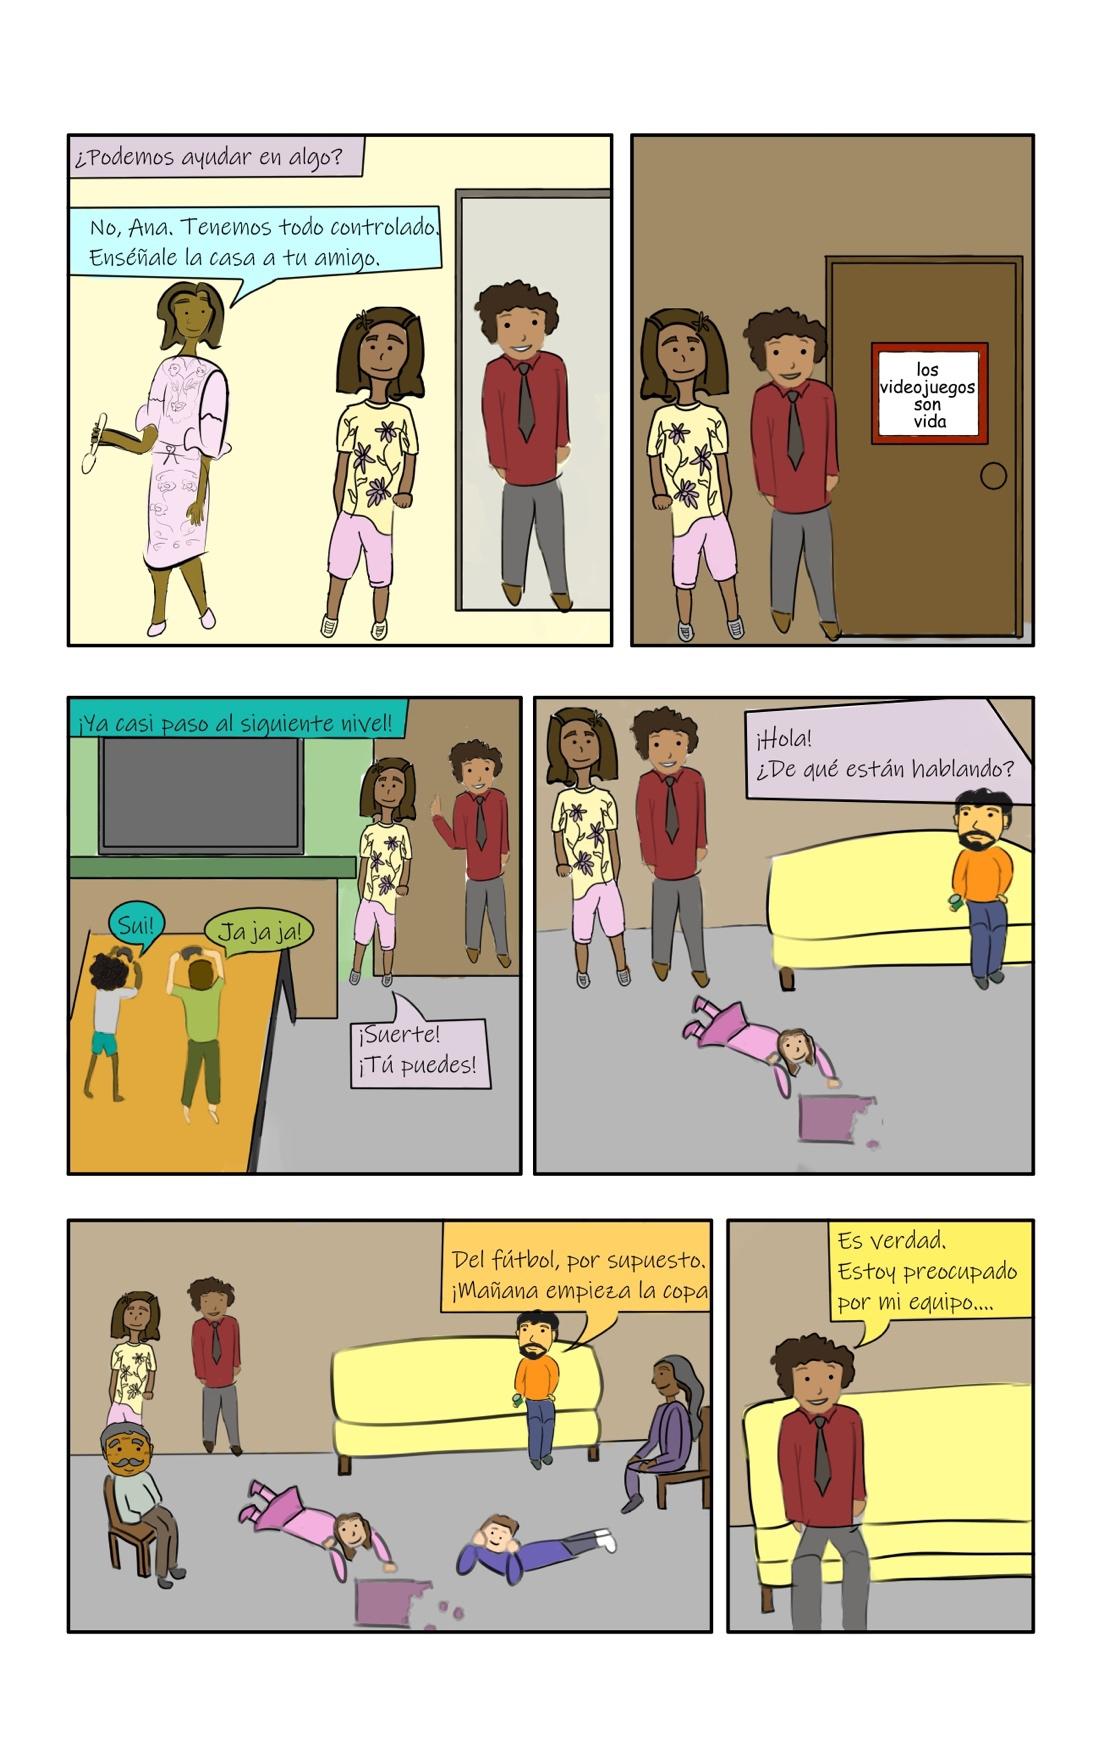 Panel 1: Ana asks her mother, "¿Podemos ayudar en algo?" Her mother resonds, "No, Ana. Tenemos todo controlado. Enséñale la casa a tu amigo." Panel 2: Ana and Carlos walk to a door in the house with a sign on it that reads, "los videojuegos son vida." Panel 3: Ana and Carlos enter the room and hear someone say, "¡Ya casi paso al siguiente nivel!" Two kids are laying down in front of a tv and playing video games. The one with lots of dark curly hair and a white shirt says, "Sui!" The one on the right with short brown hair and a green shirt says, "ja ja ja!" Ana says, "¡Suerte! ¡Tú puedes!" Panel 4: Ana and Carlos walk farther into the room and see a small girl in pink lying on the floor, putting together a pink puzzle. Ana's dad sits on a yellow couch. Ana says to him, "¡Hola! ¿De qué están hablando?" Panel 5: The panel zooms out to show Ana's grandfather sitting on a chair, another child helping with the puzzle, and a woman with long gray hair wearing purple sitting in a chair talking to Ana's dad. He responds, "Del fútbol, por supuesto. ¡Mañana empieza la copa!" Panel 6: The panel zooms in to show Carlos sitting down on the yellow couch. "Es verdad," he says. "Estoy preocupado por mi equipo..."